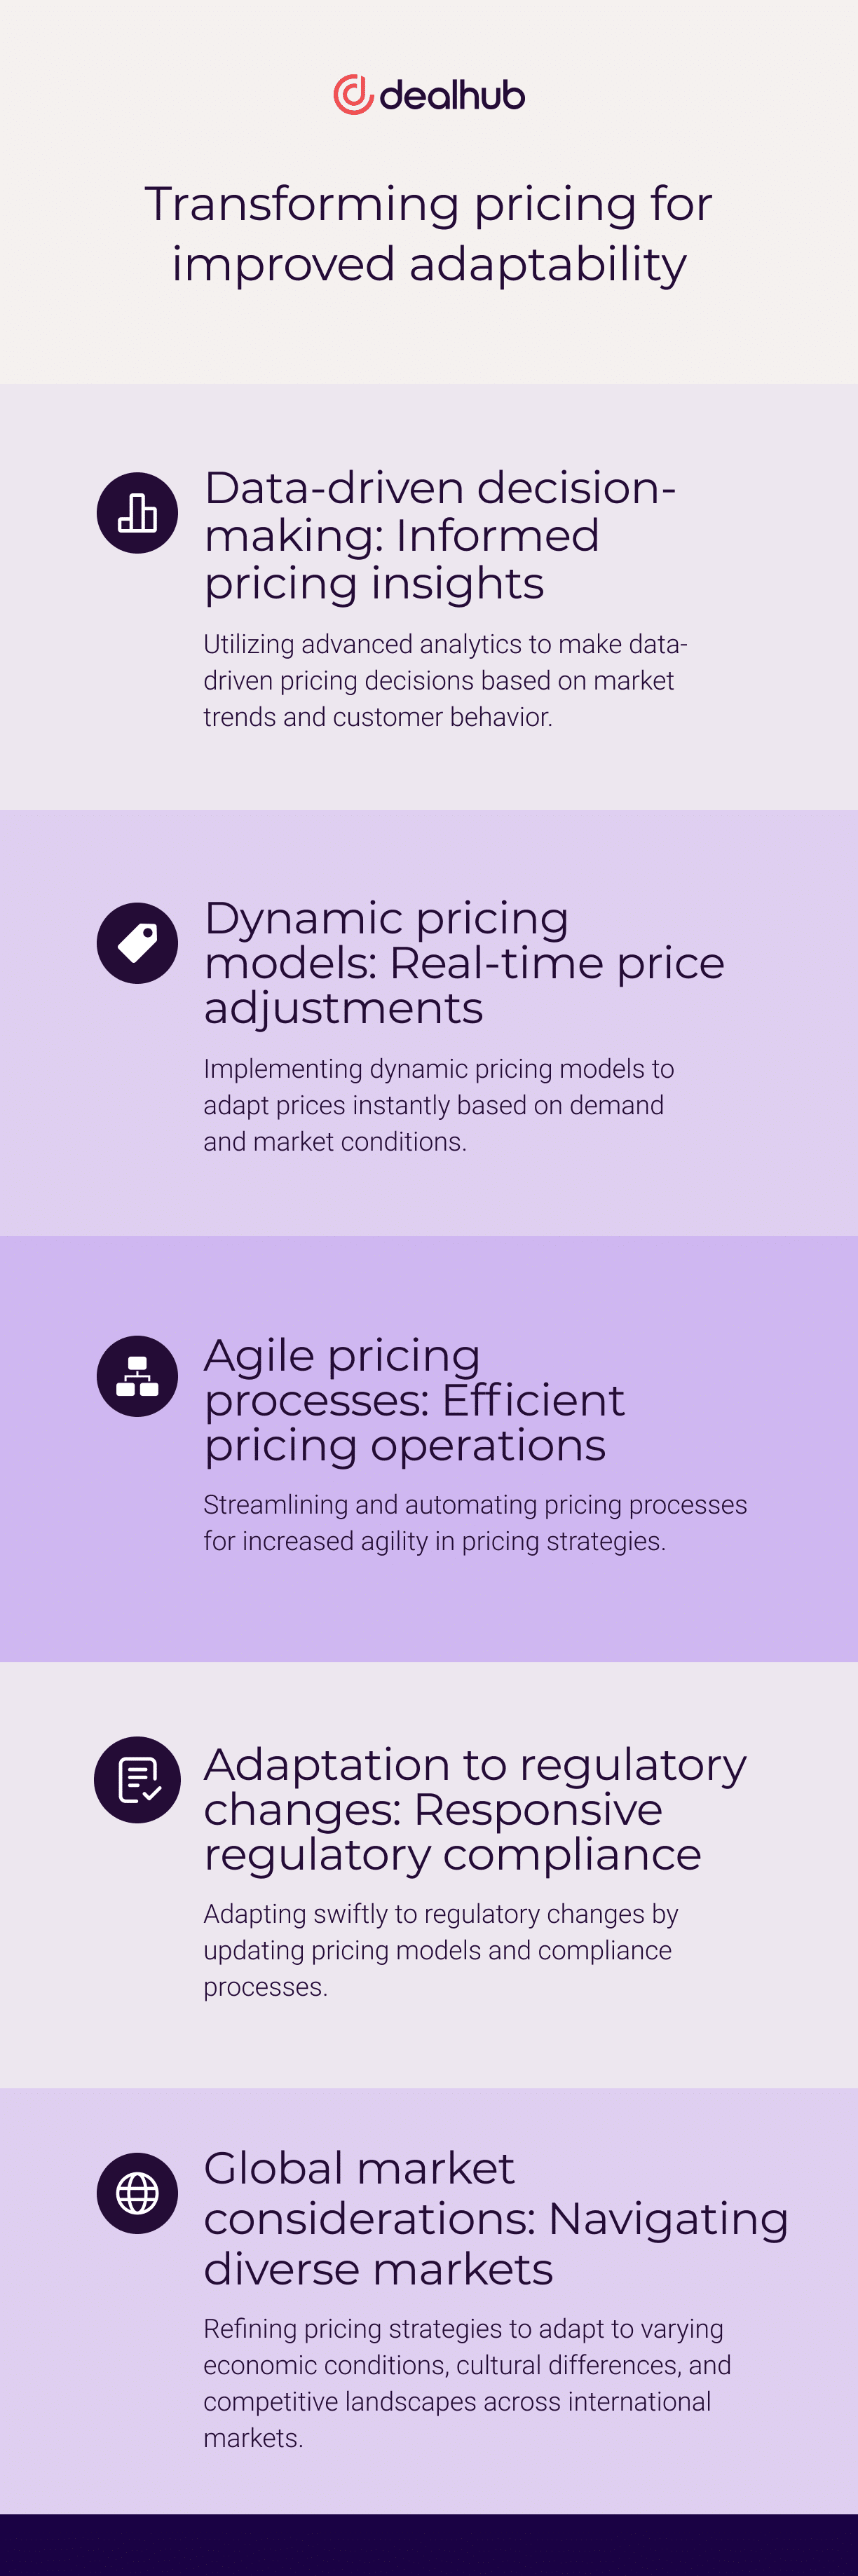 Transforming pricing for improved adaptability